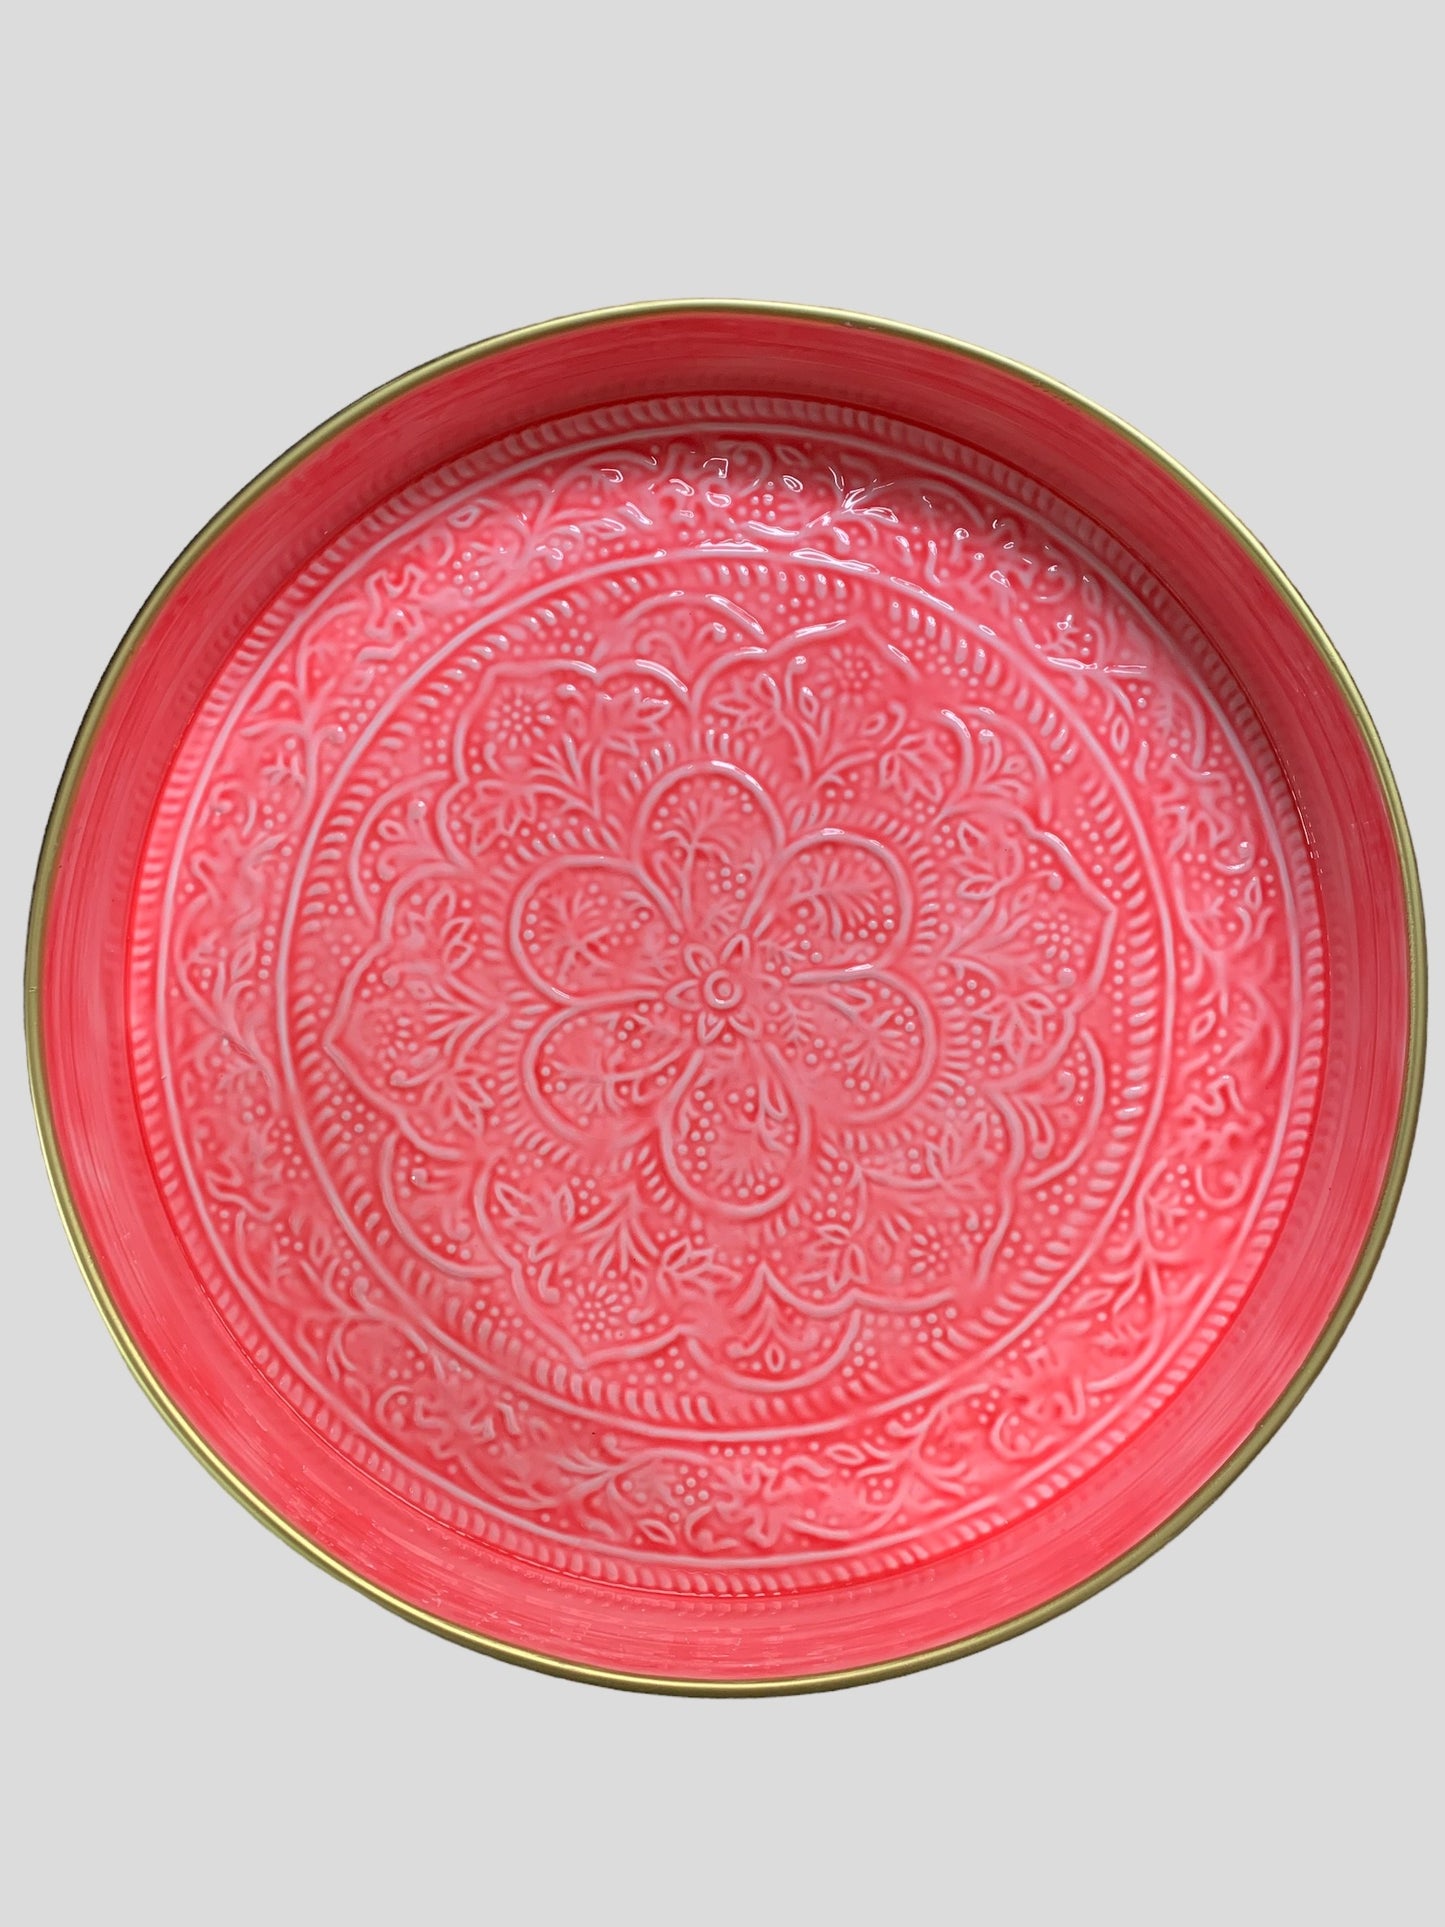 A large enamel tray in a bright pink colour with a floral pattern.